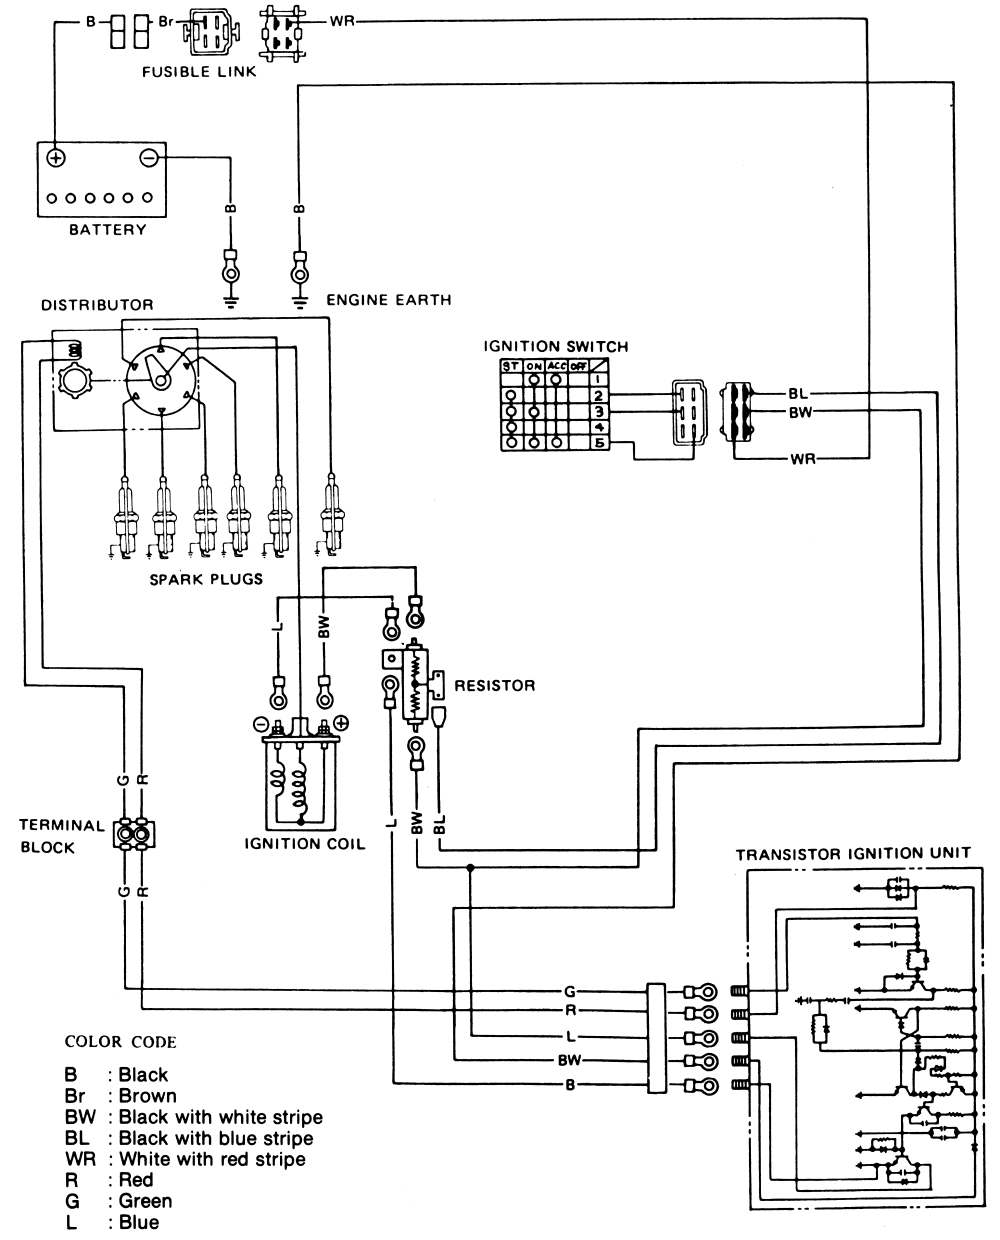 wiring diagram for datsun b 210 ignition